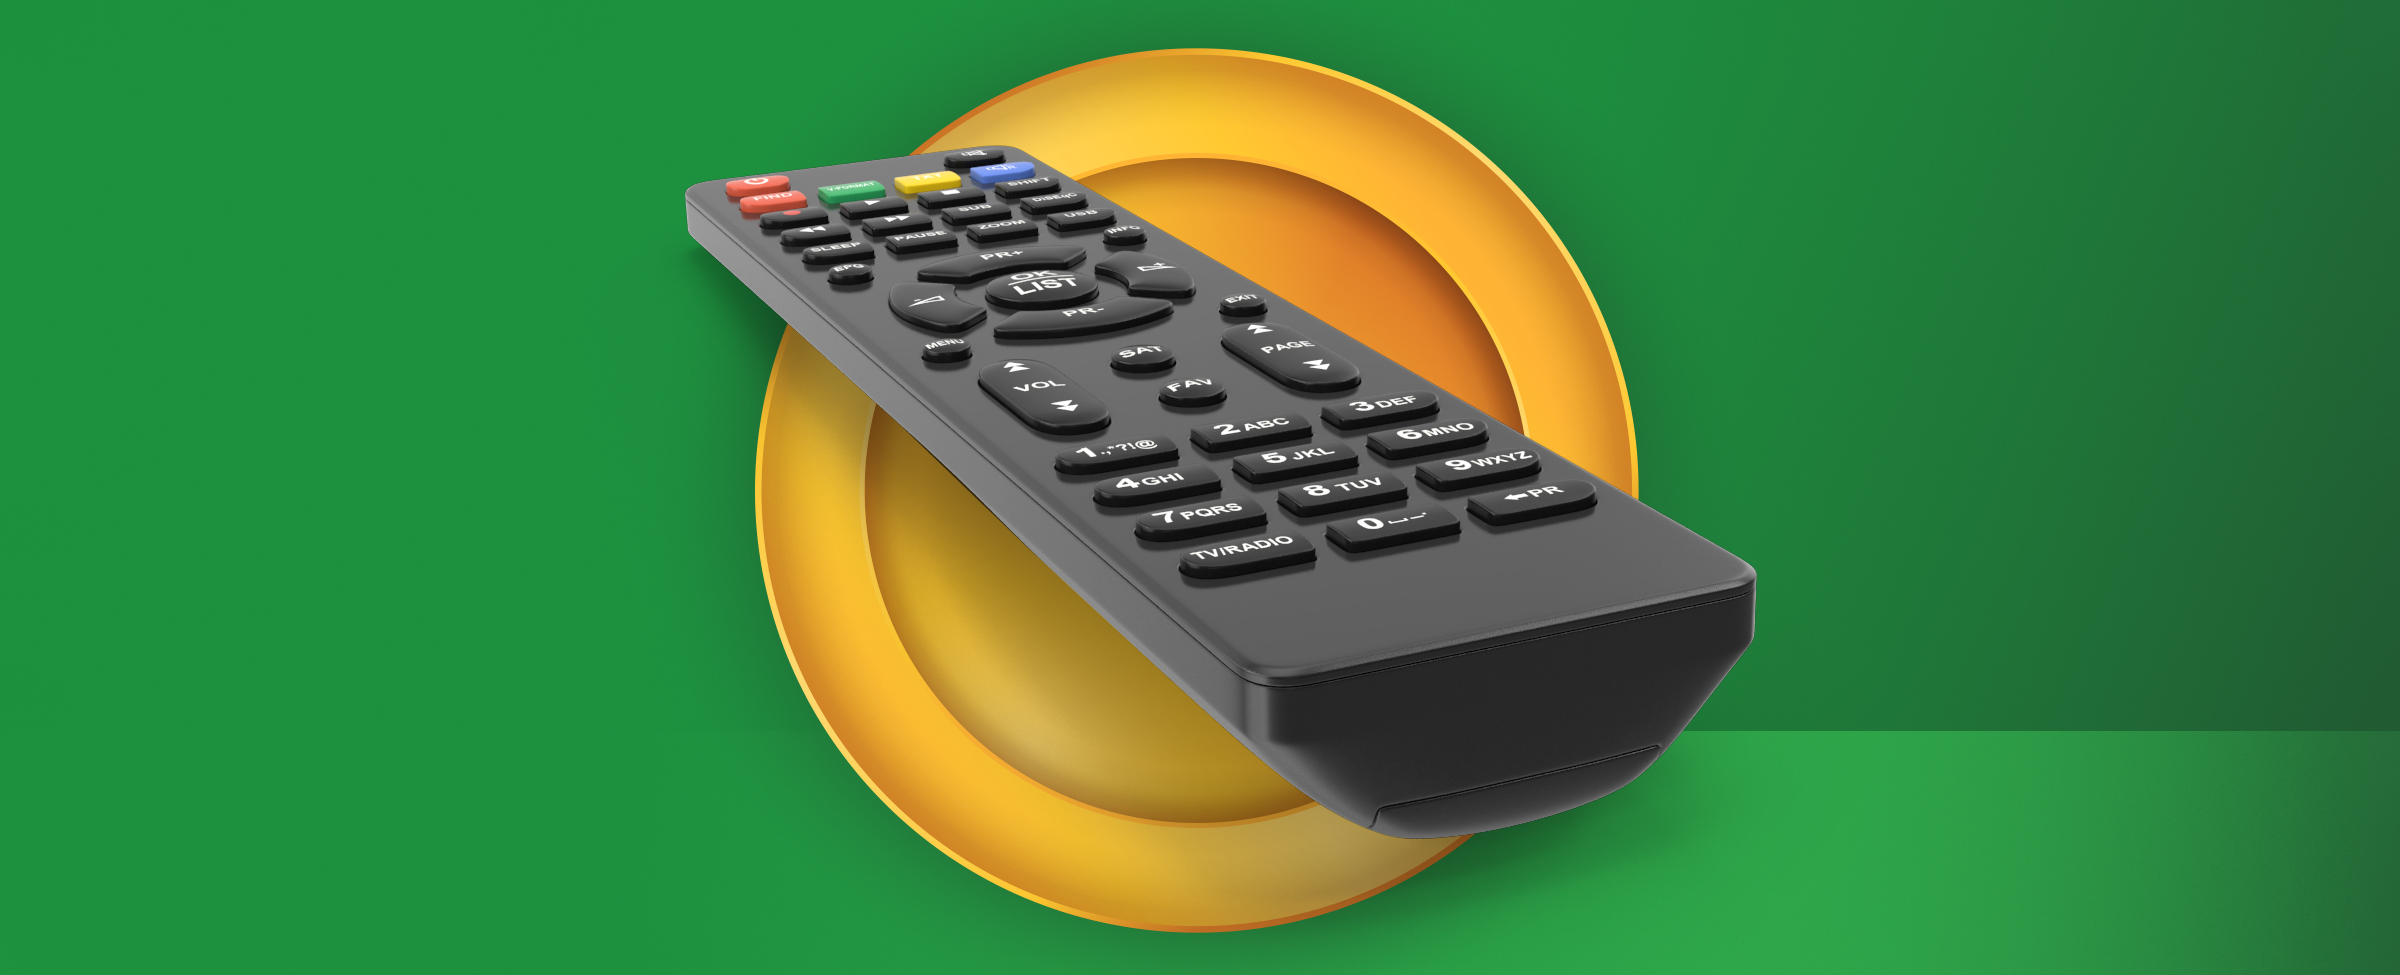 A TV remote on a green background